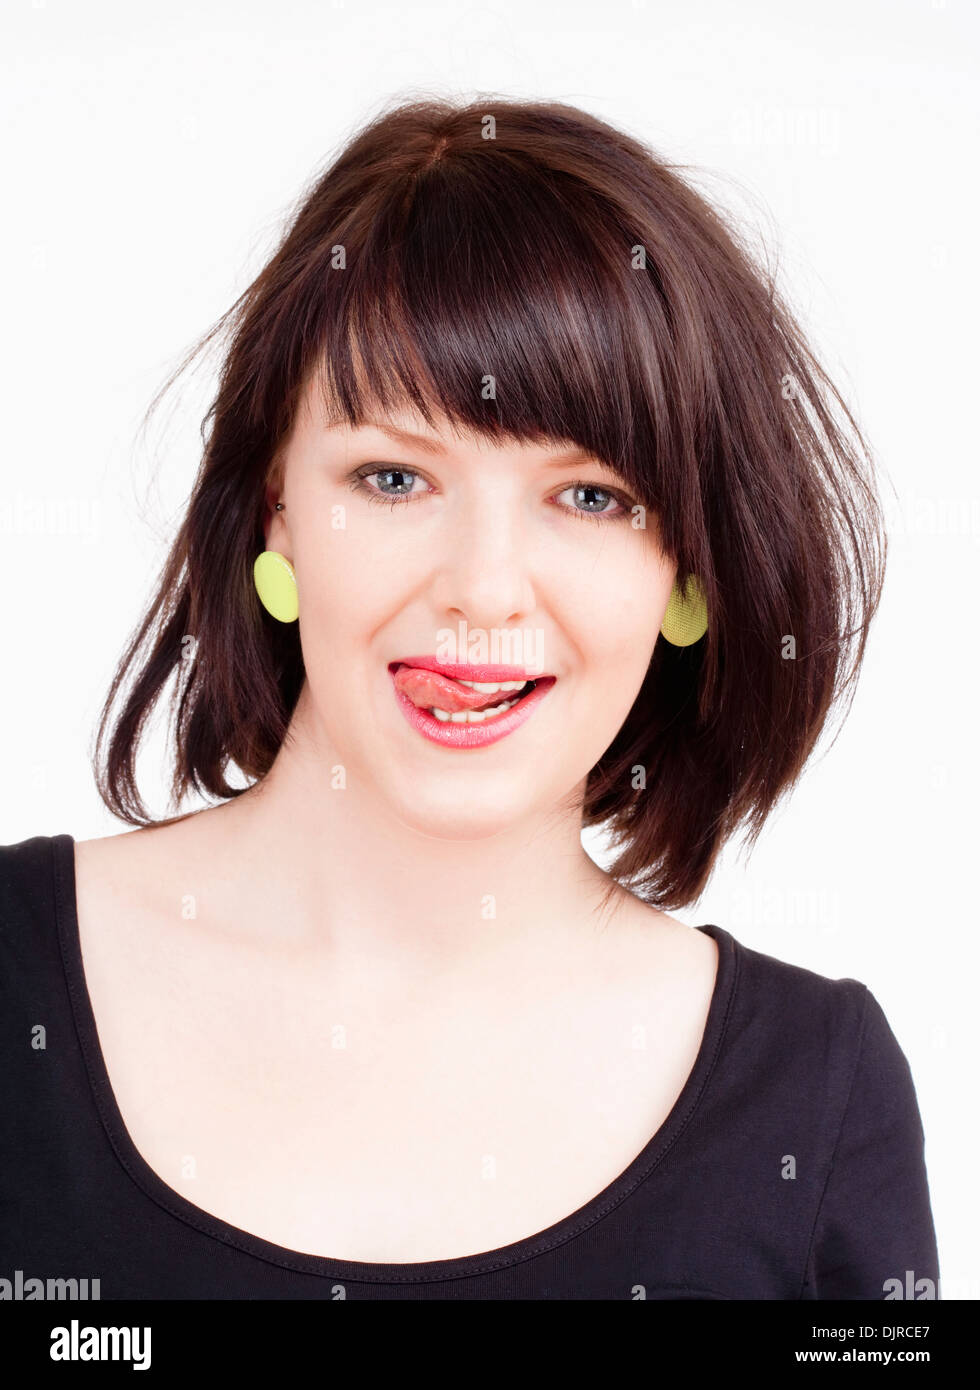 Young Woman with Dark Brown Hair Licking her Lips Stock Photo